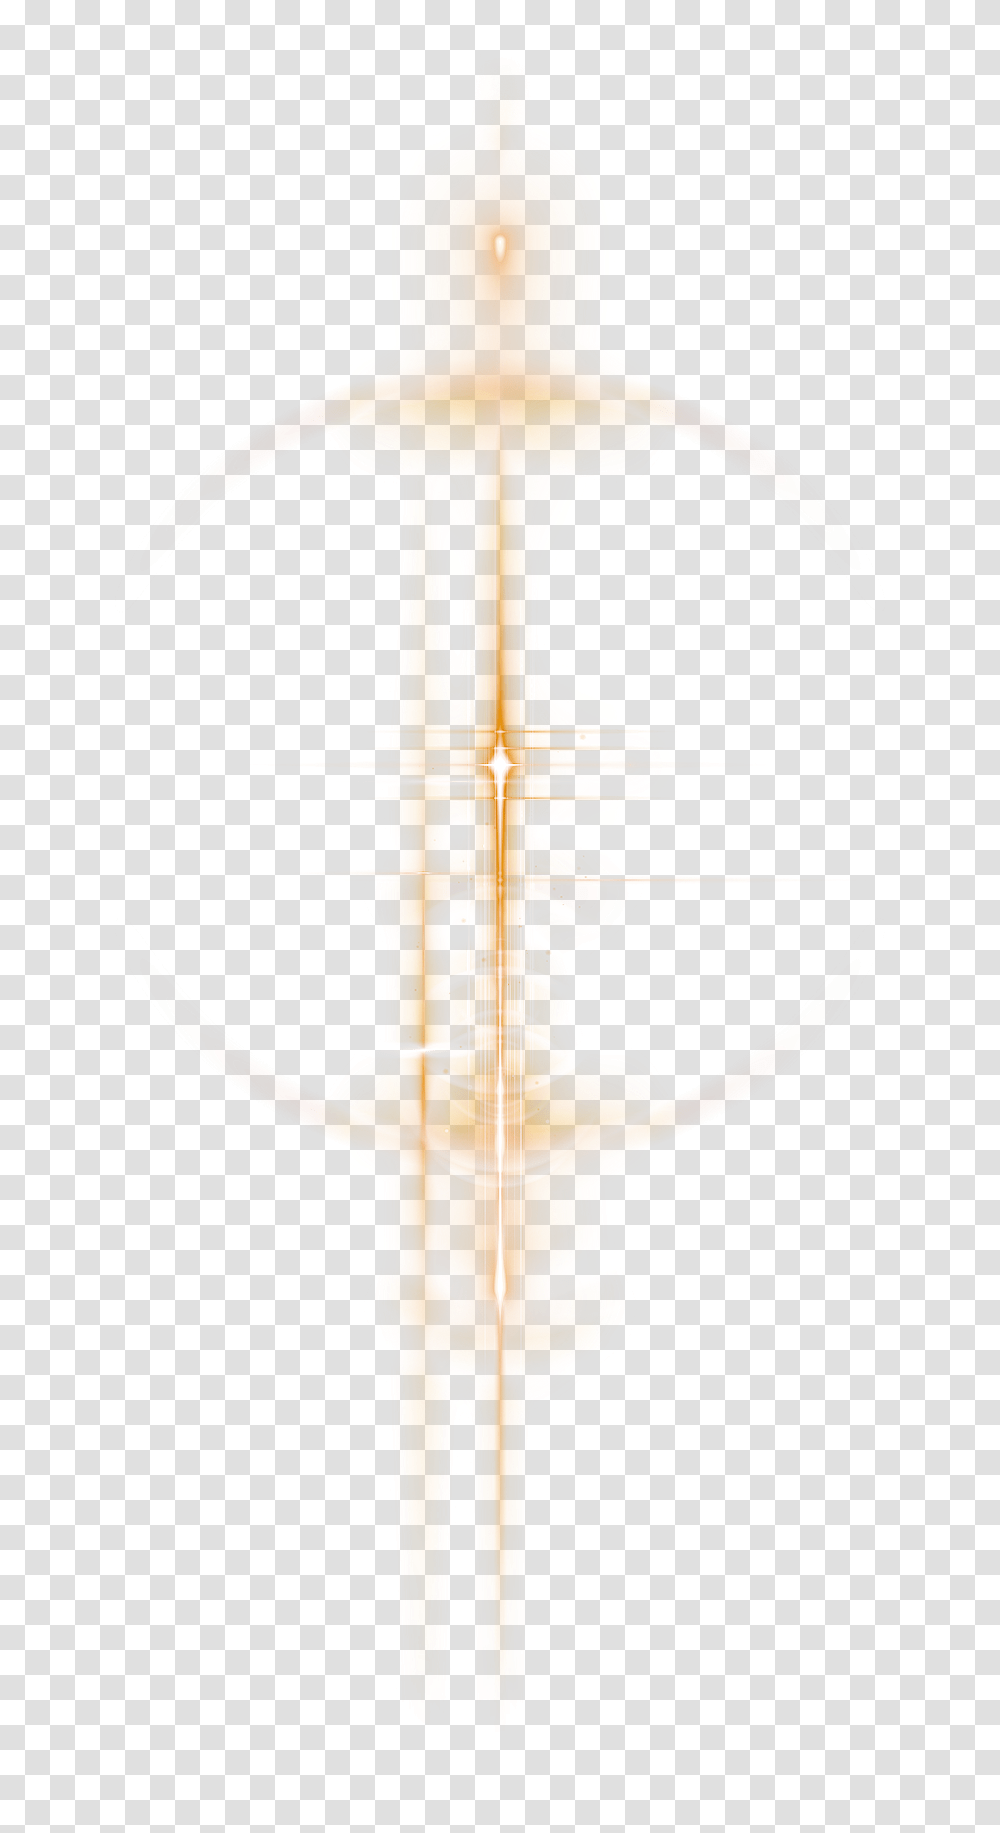 Flare 2 Gold Circle, Lamp, Leisure Activities, Cello, Musical Instrument Transparent Png